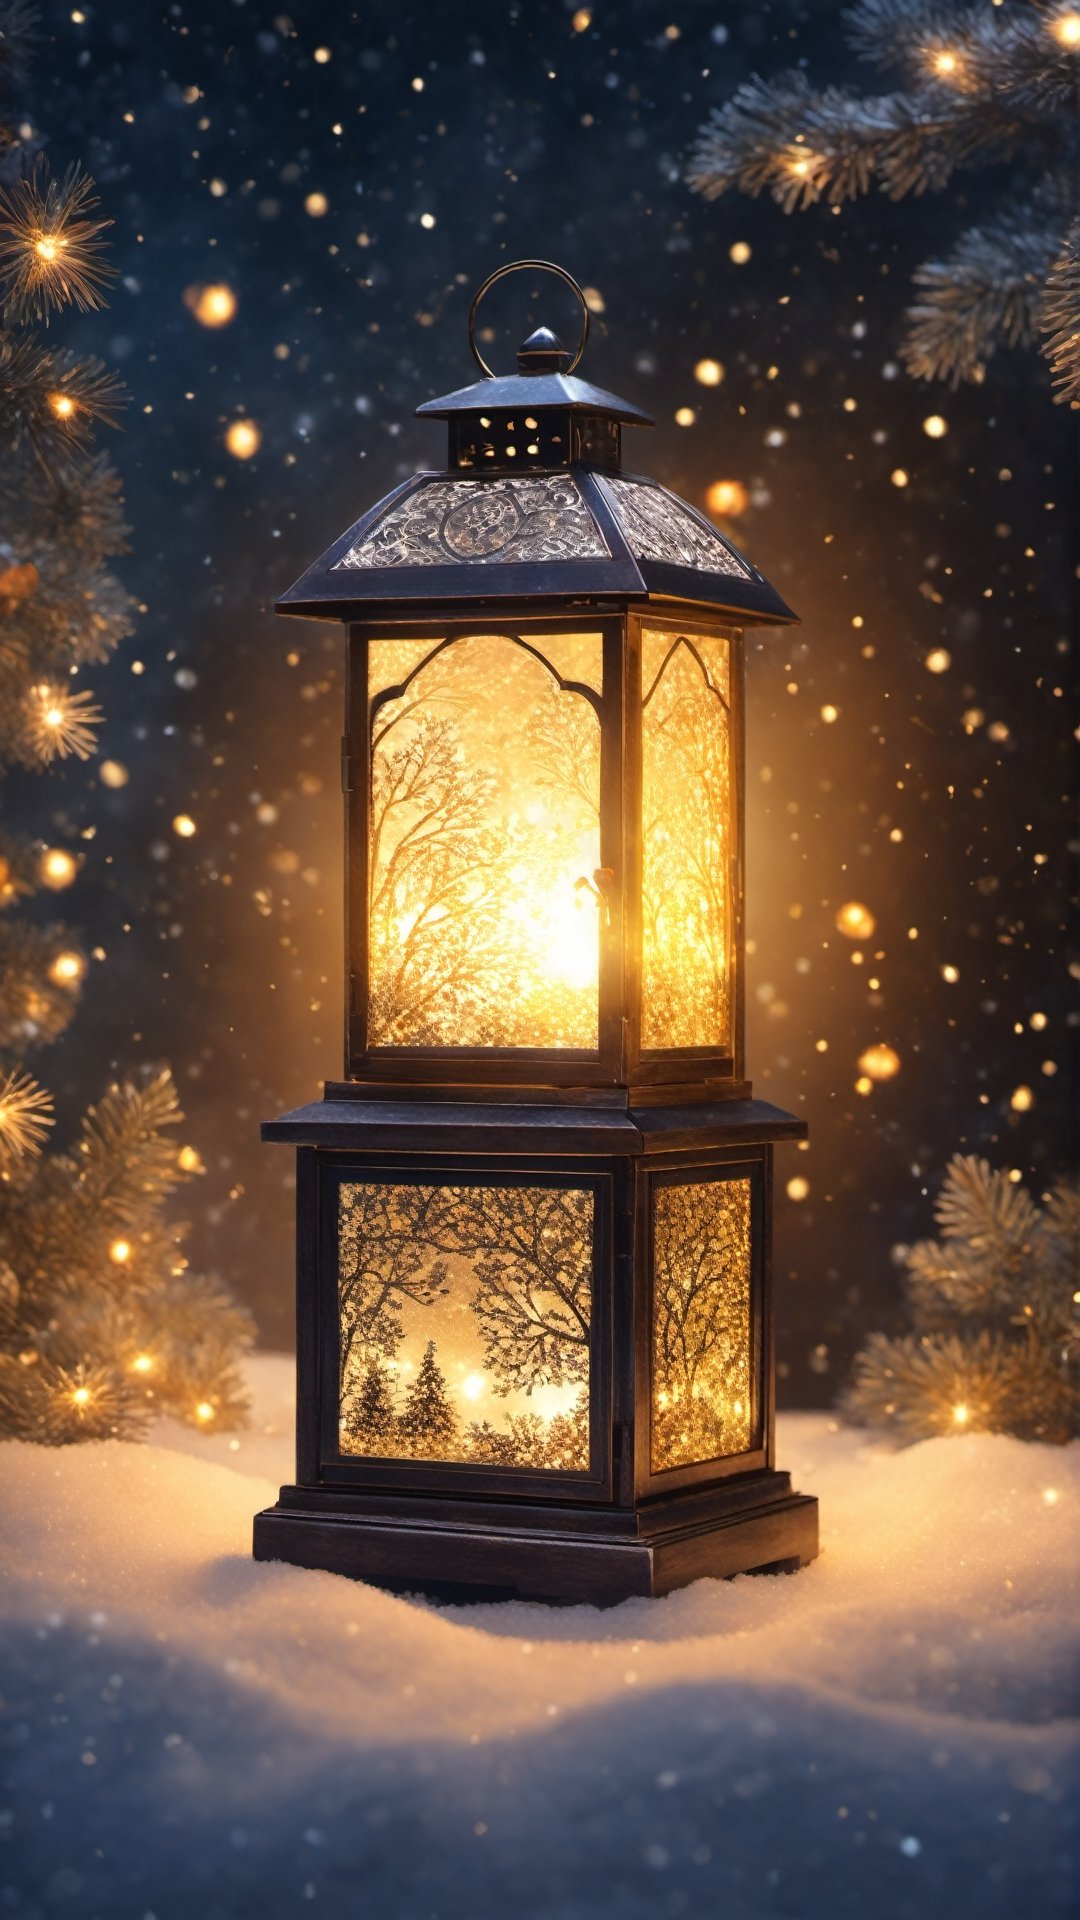 	space background, one holiday lamp-lantern, , abstract beautiful light, New Year's forest, fairy-tale mystical setting, beautiful New Year's motifs, mid-fantasy, inscribed in the holiday concept, stylish luxury packaging concept, symbolizing magic, fantastic atmosphere, professional shot, side view, hyper-realistic , 4K, hyper-realistic foreground